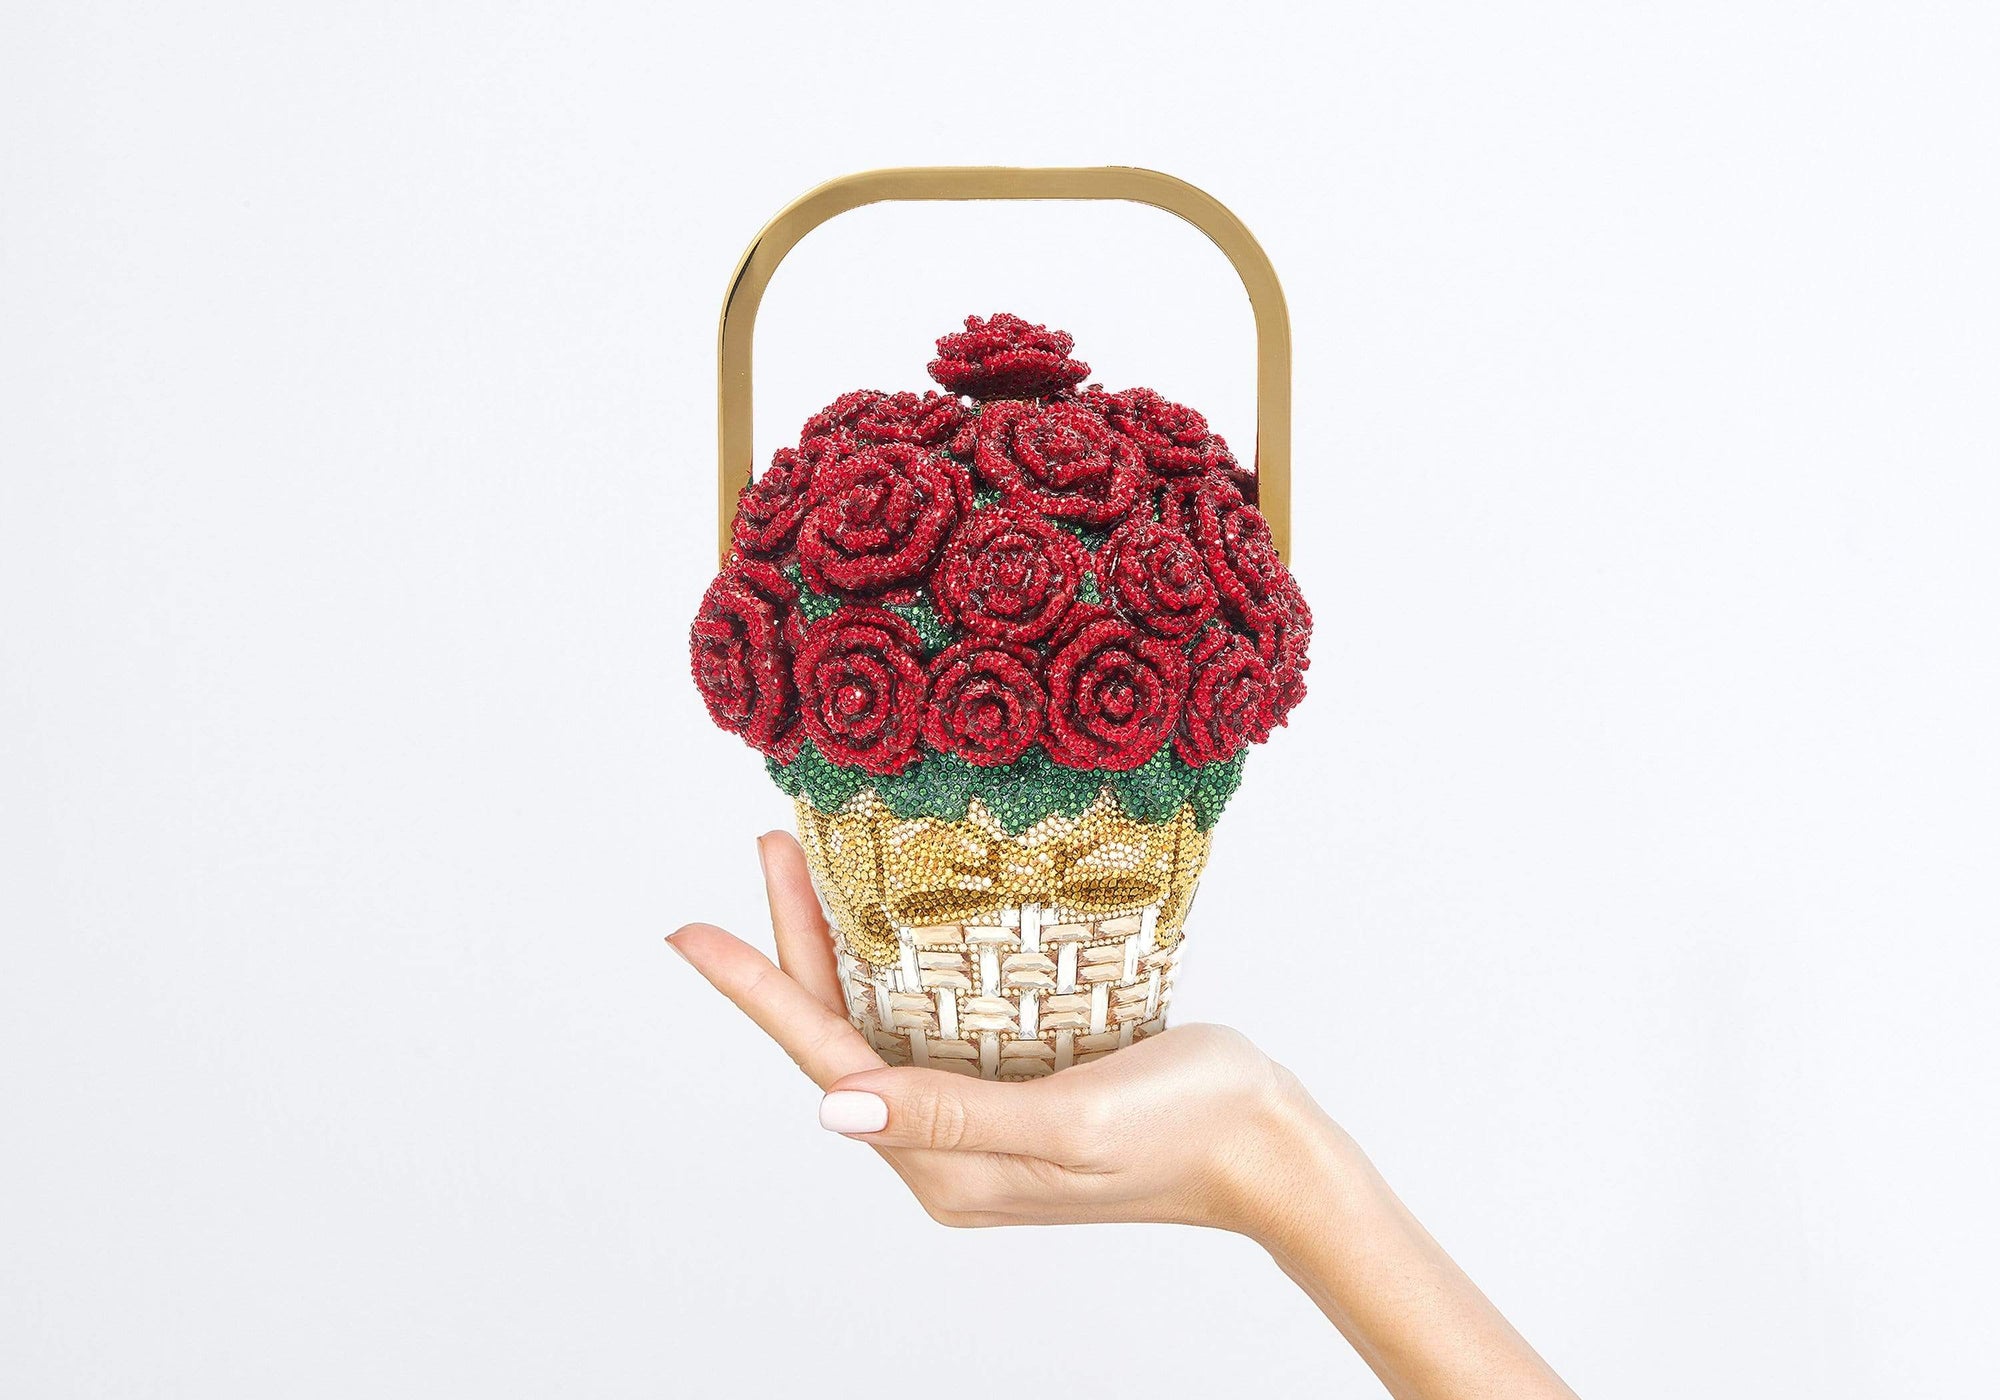 Basket of Roses Forever Bouquet